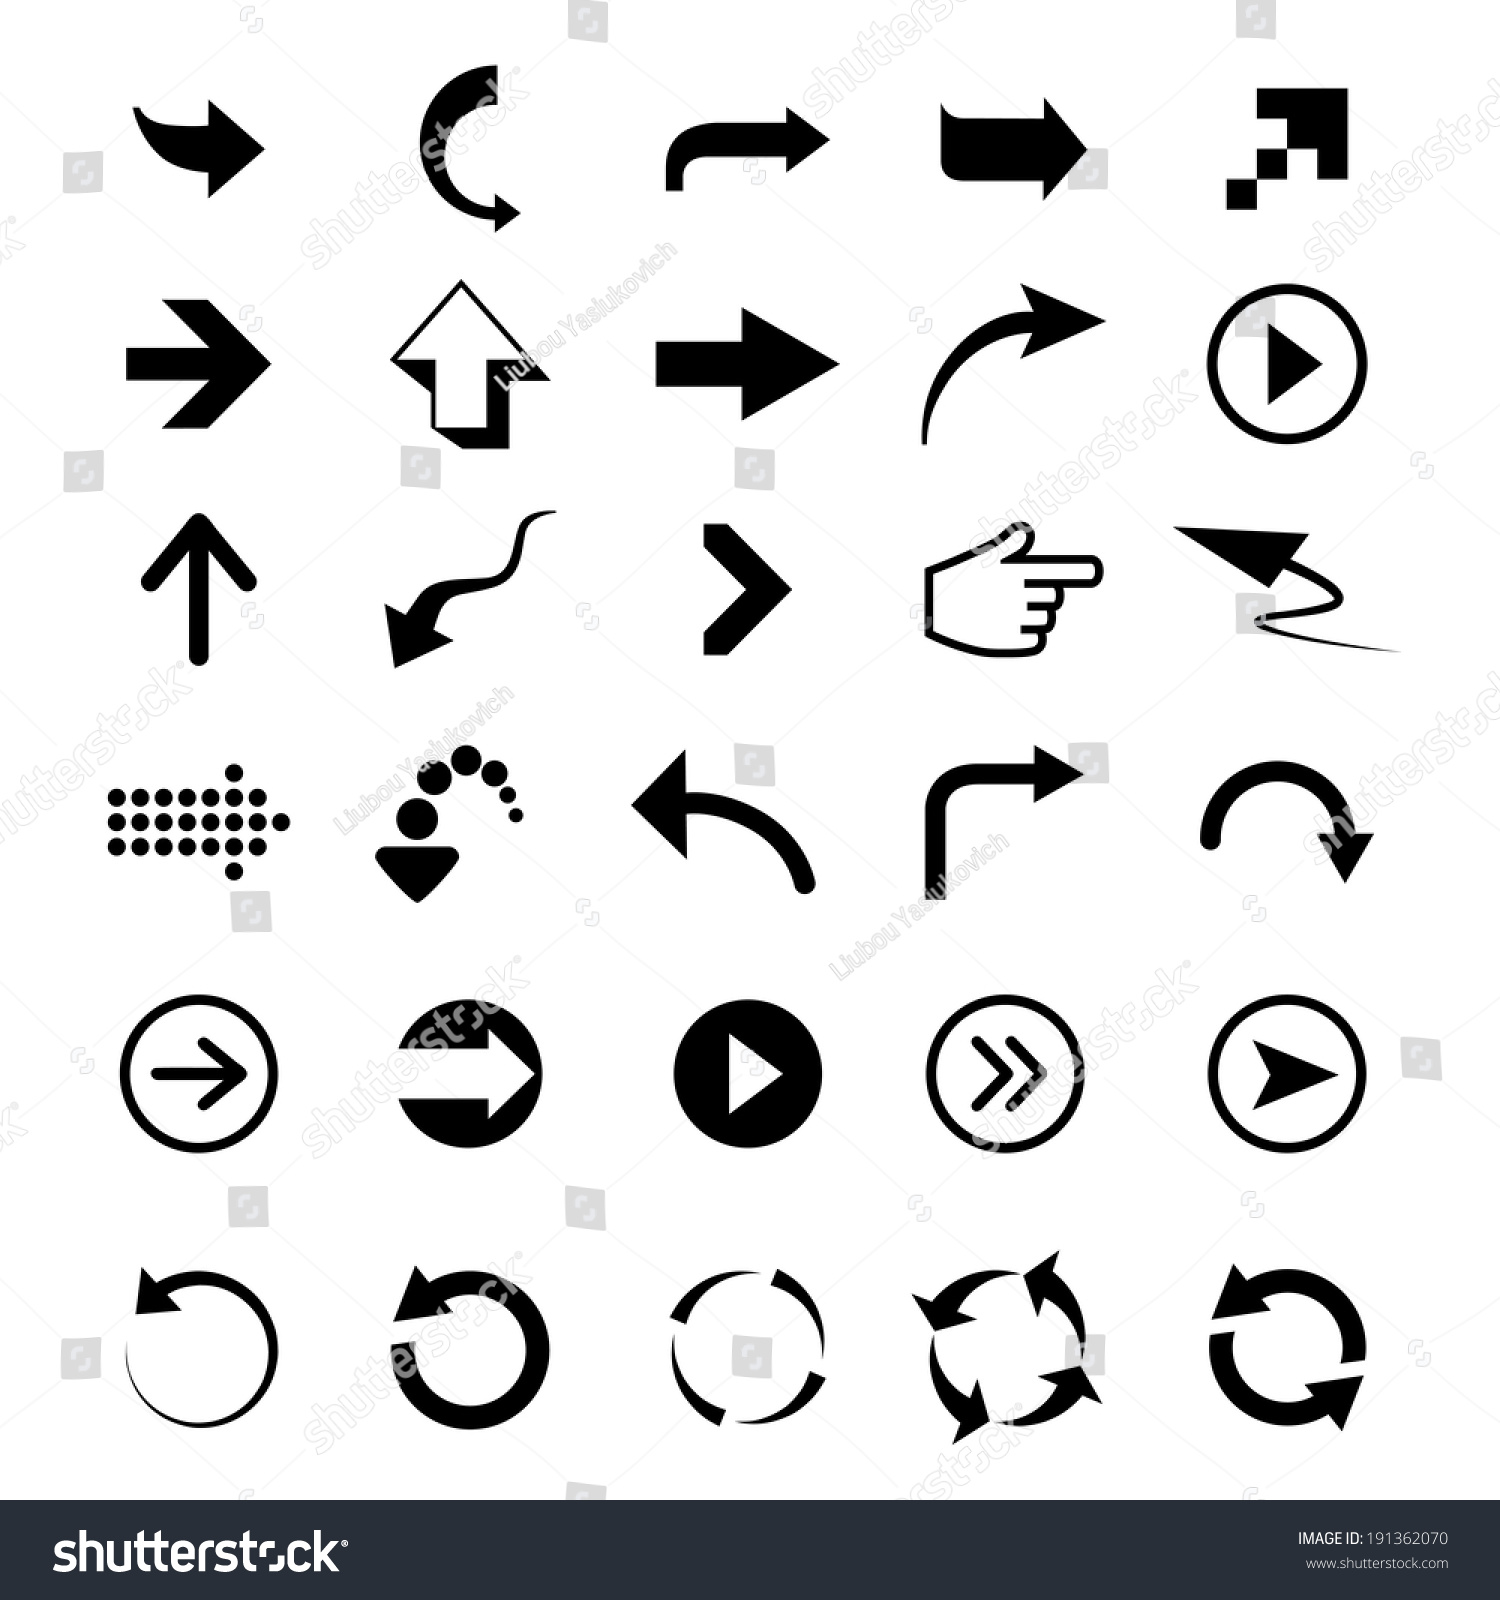 Vector design elements. Arrows signs on a white background #191362070